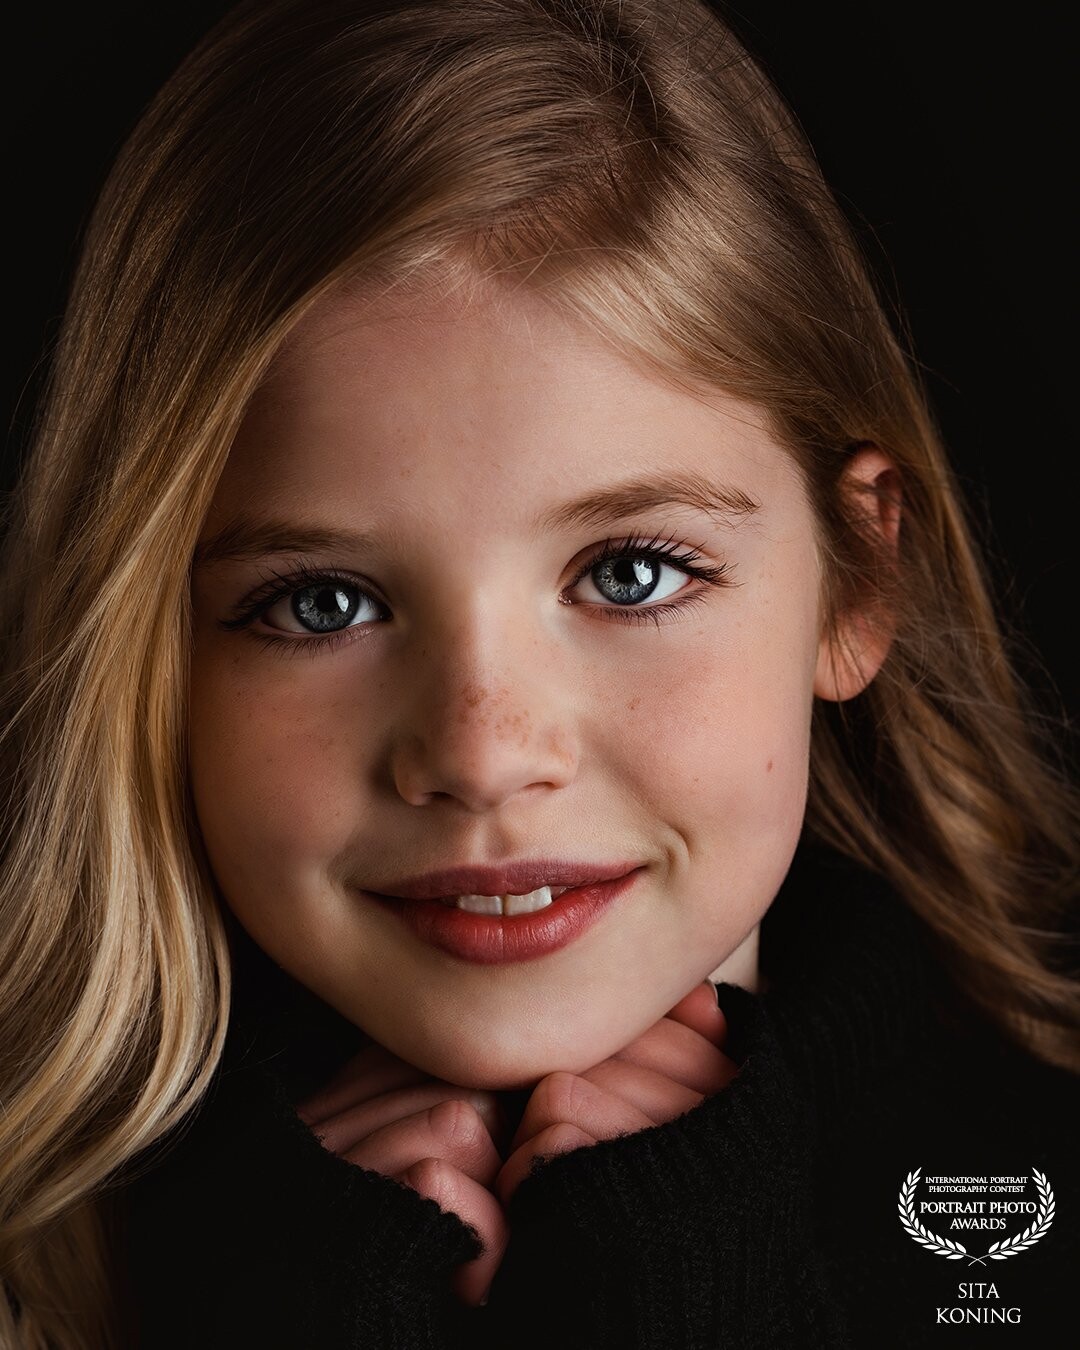 Love this little girl with her big blue eyes! Such a cosy Feeling with her hands in the sleeves of her sweater. One of the many beautiful pictures I took during this session.